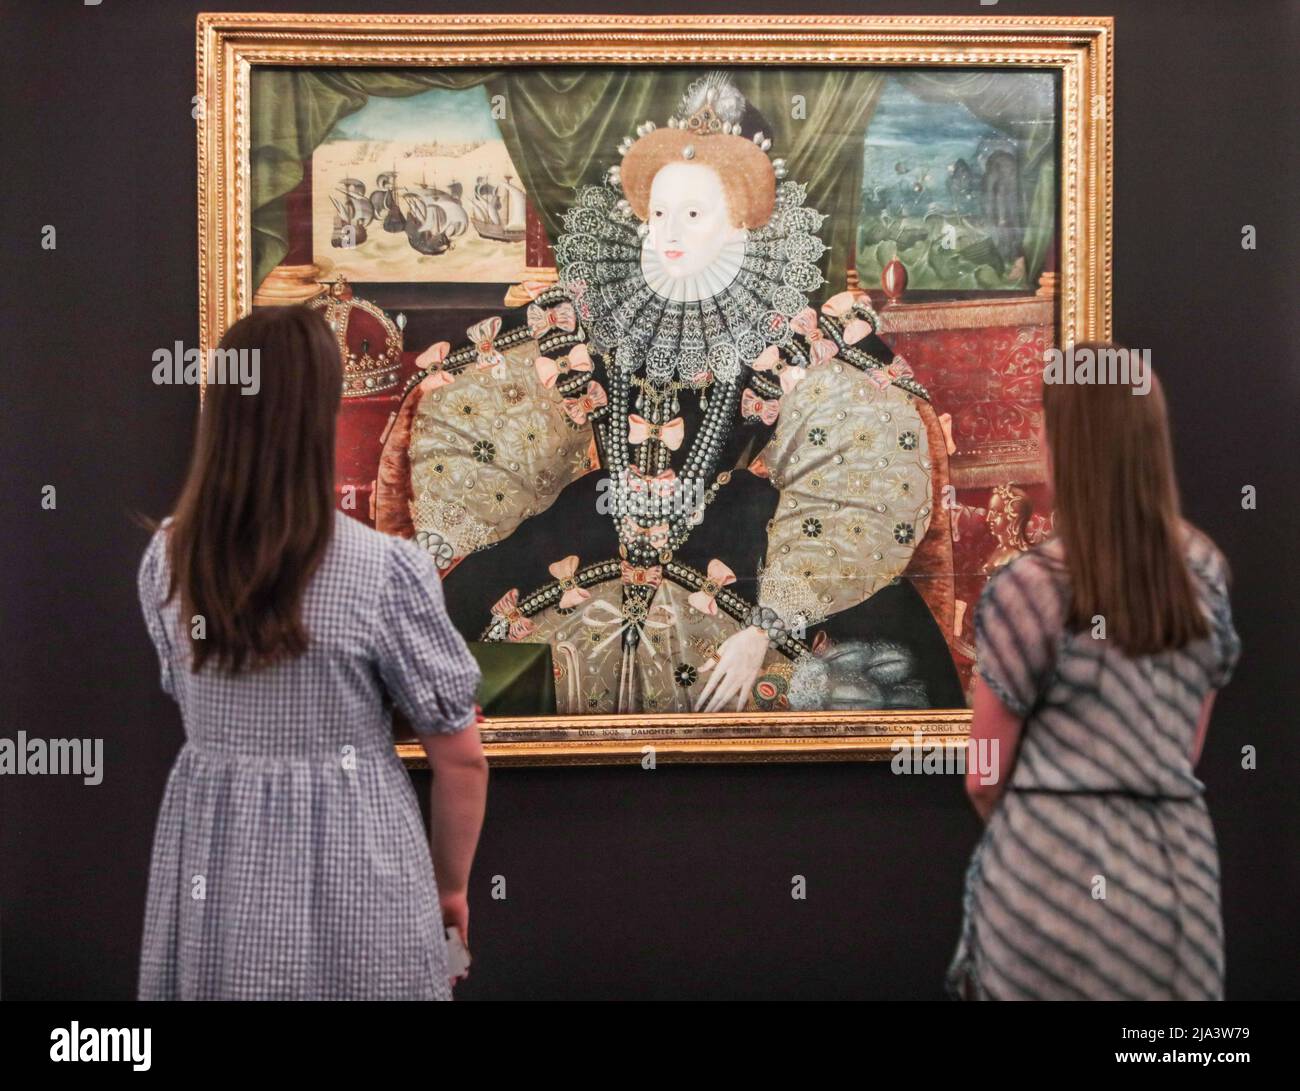 London, UK. 27th May, 2022. Showcasing of Royal Portraits & Manuscripts from Across the Land. Led by Iconic Armada Portrait of Queen Elizabeth I on Loan from The Woburn Abbey Collection & Warhol Painting of Queen Elizabeth II.Paul Quezada-Neiman/Alamy Live News Credit: Paul Quezada-Neiman/Alamy Live News Stock Photo